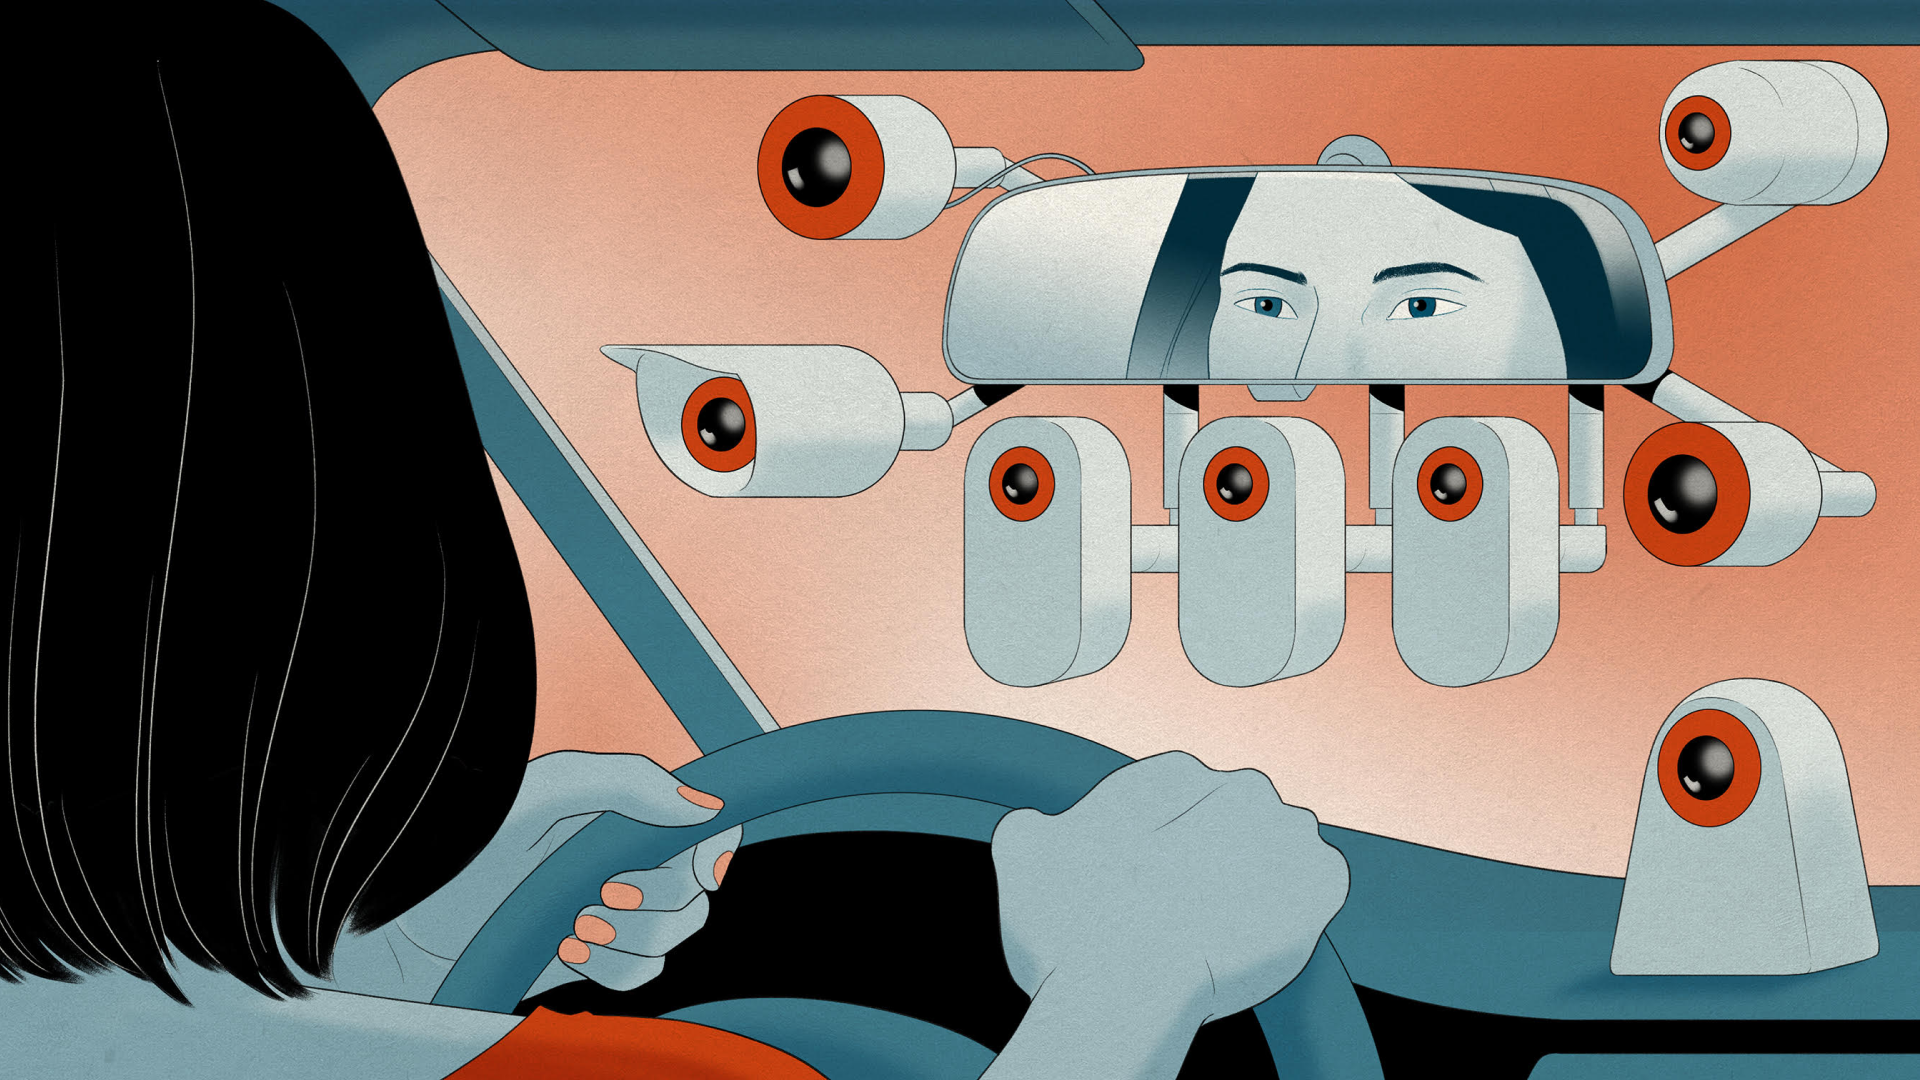 illustration of female driver with shoulder length hair looking into rearview mirror, which is surrounded by seven dash cameras pointed at her